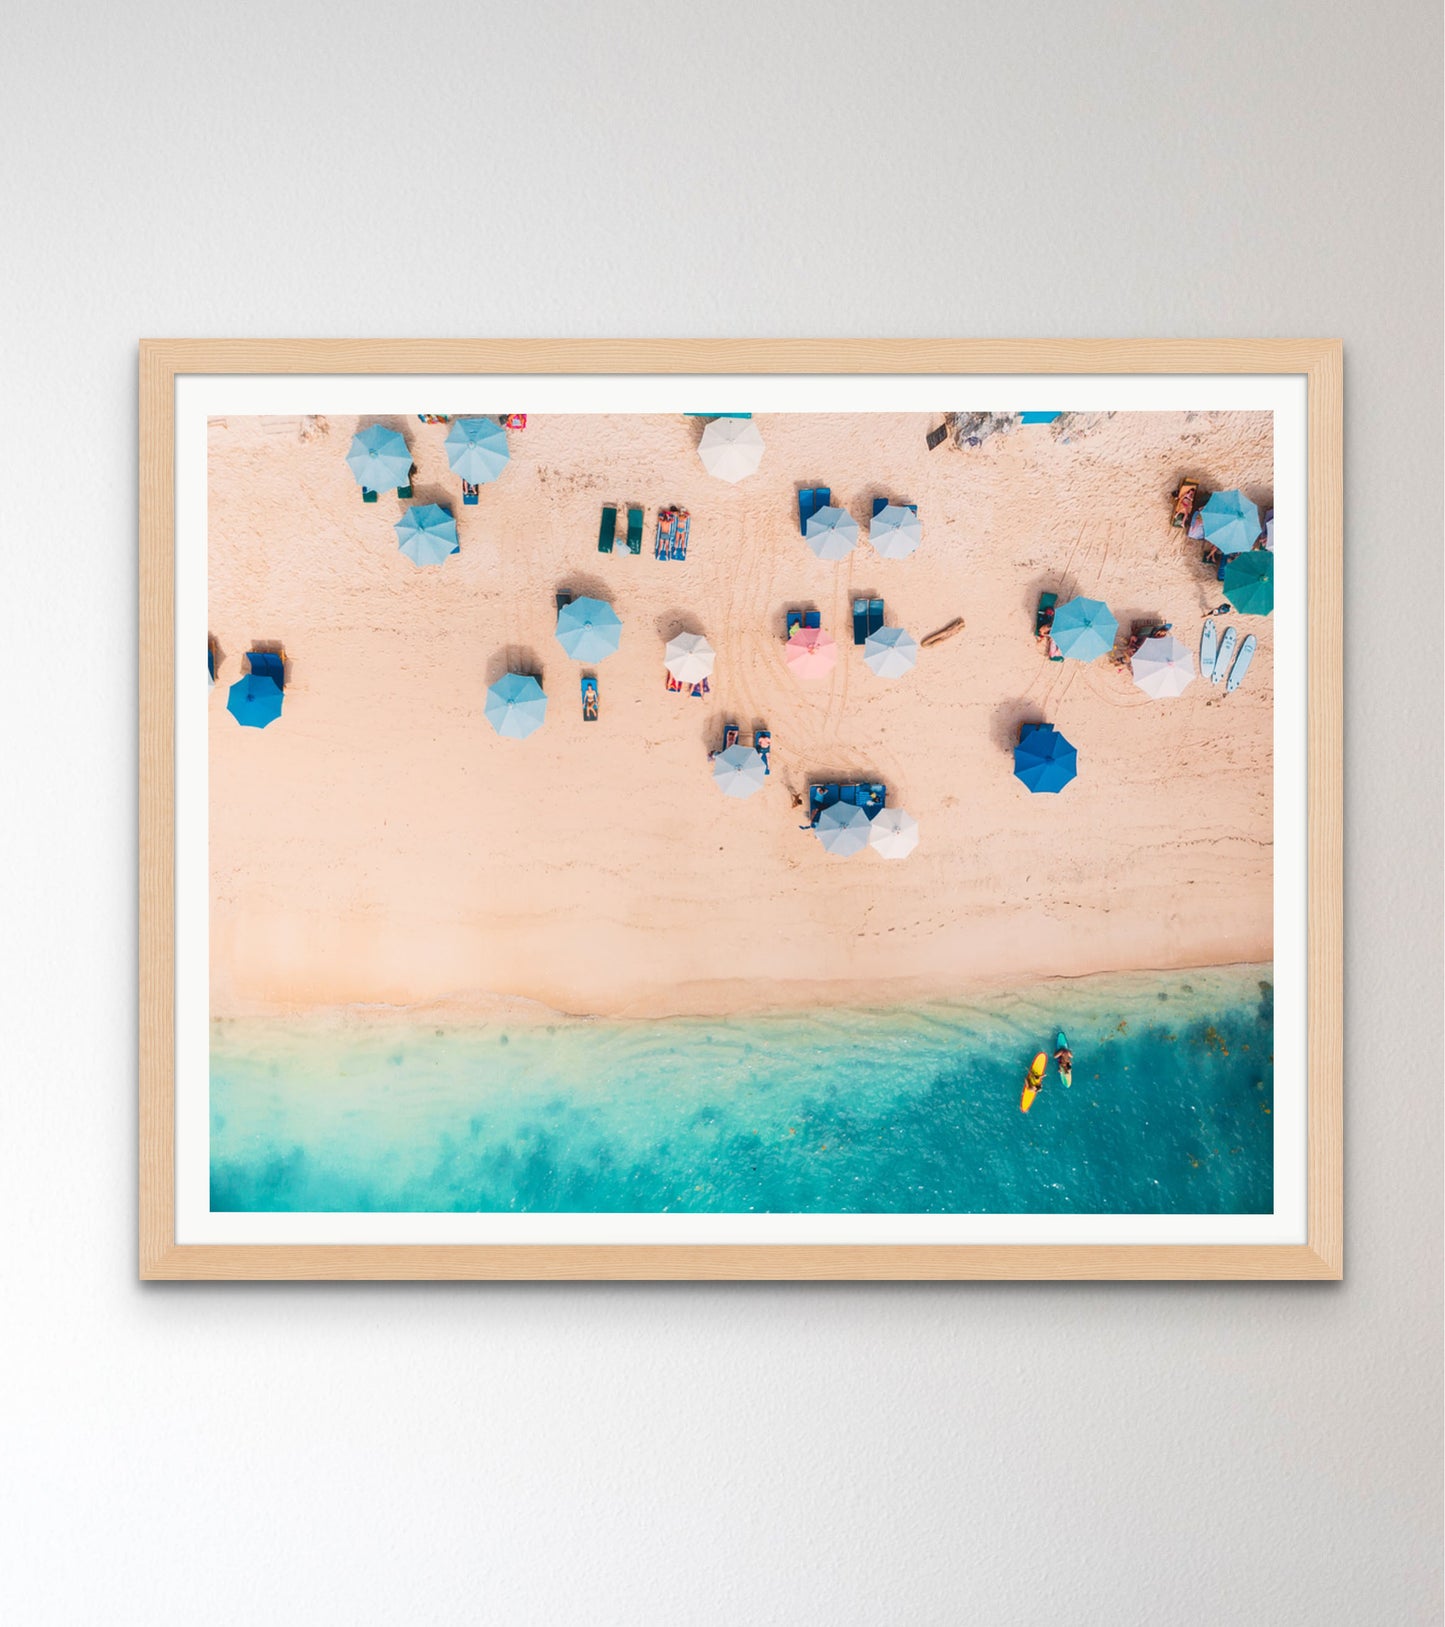 Top view of sandy beach with turquoise sea water and colorful blue umbrellas, aerial drone shot